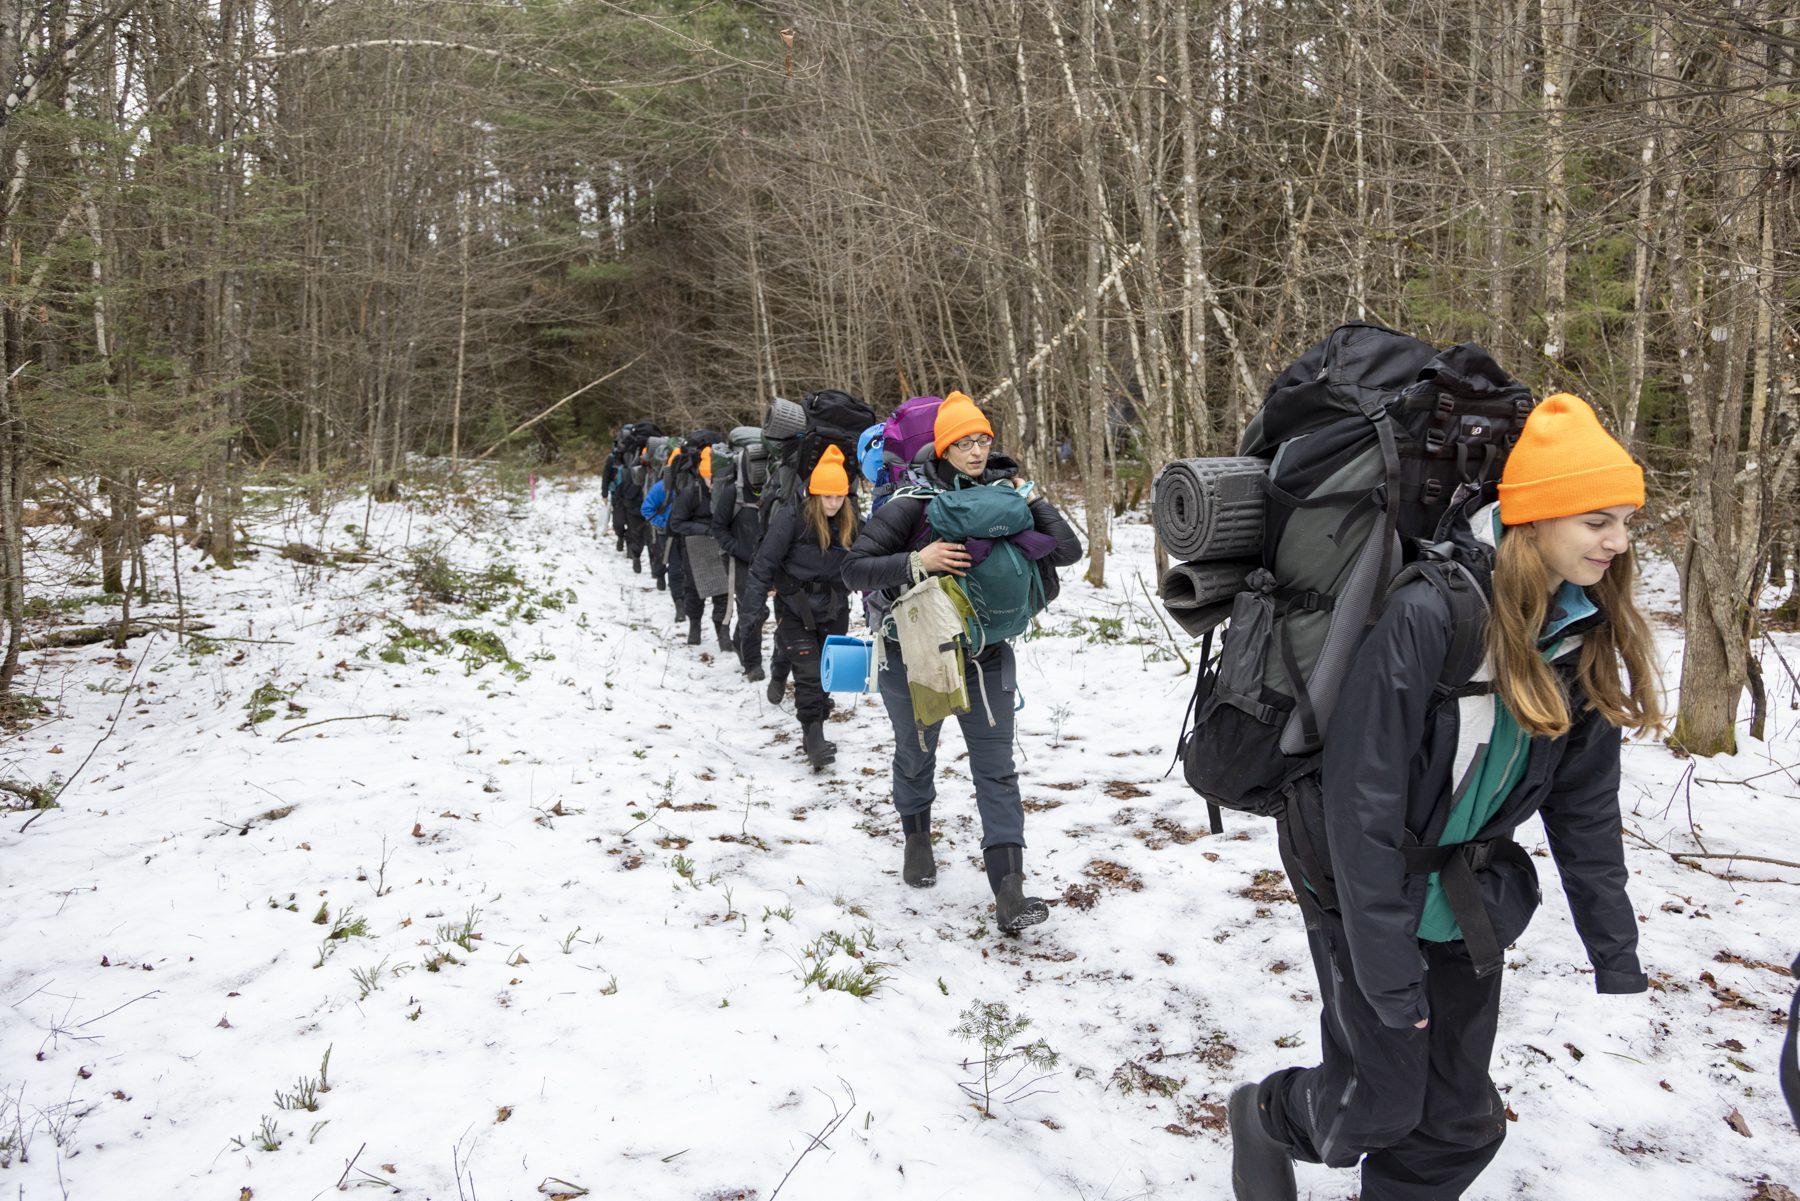 Lake Placid students tromp out of the woods toward the end of a camping trip. Photo by Mike Lynch